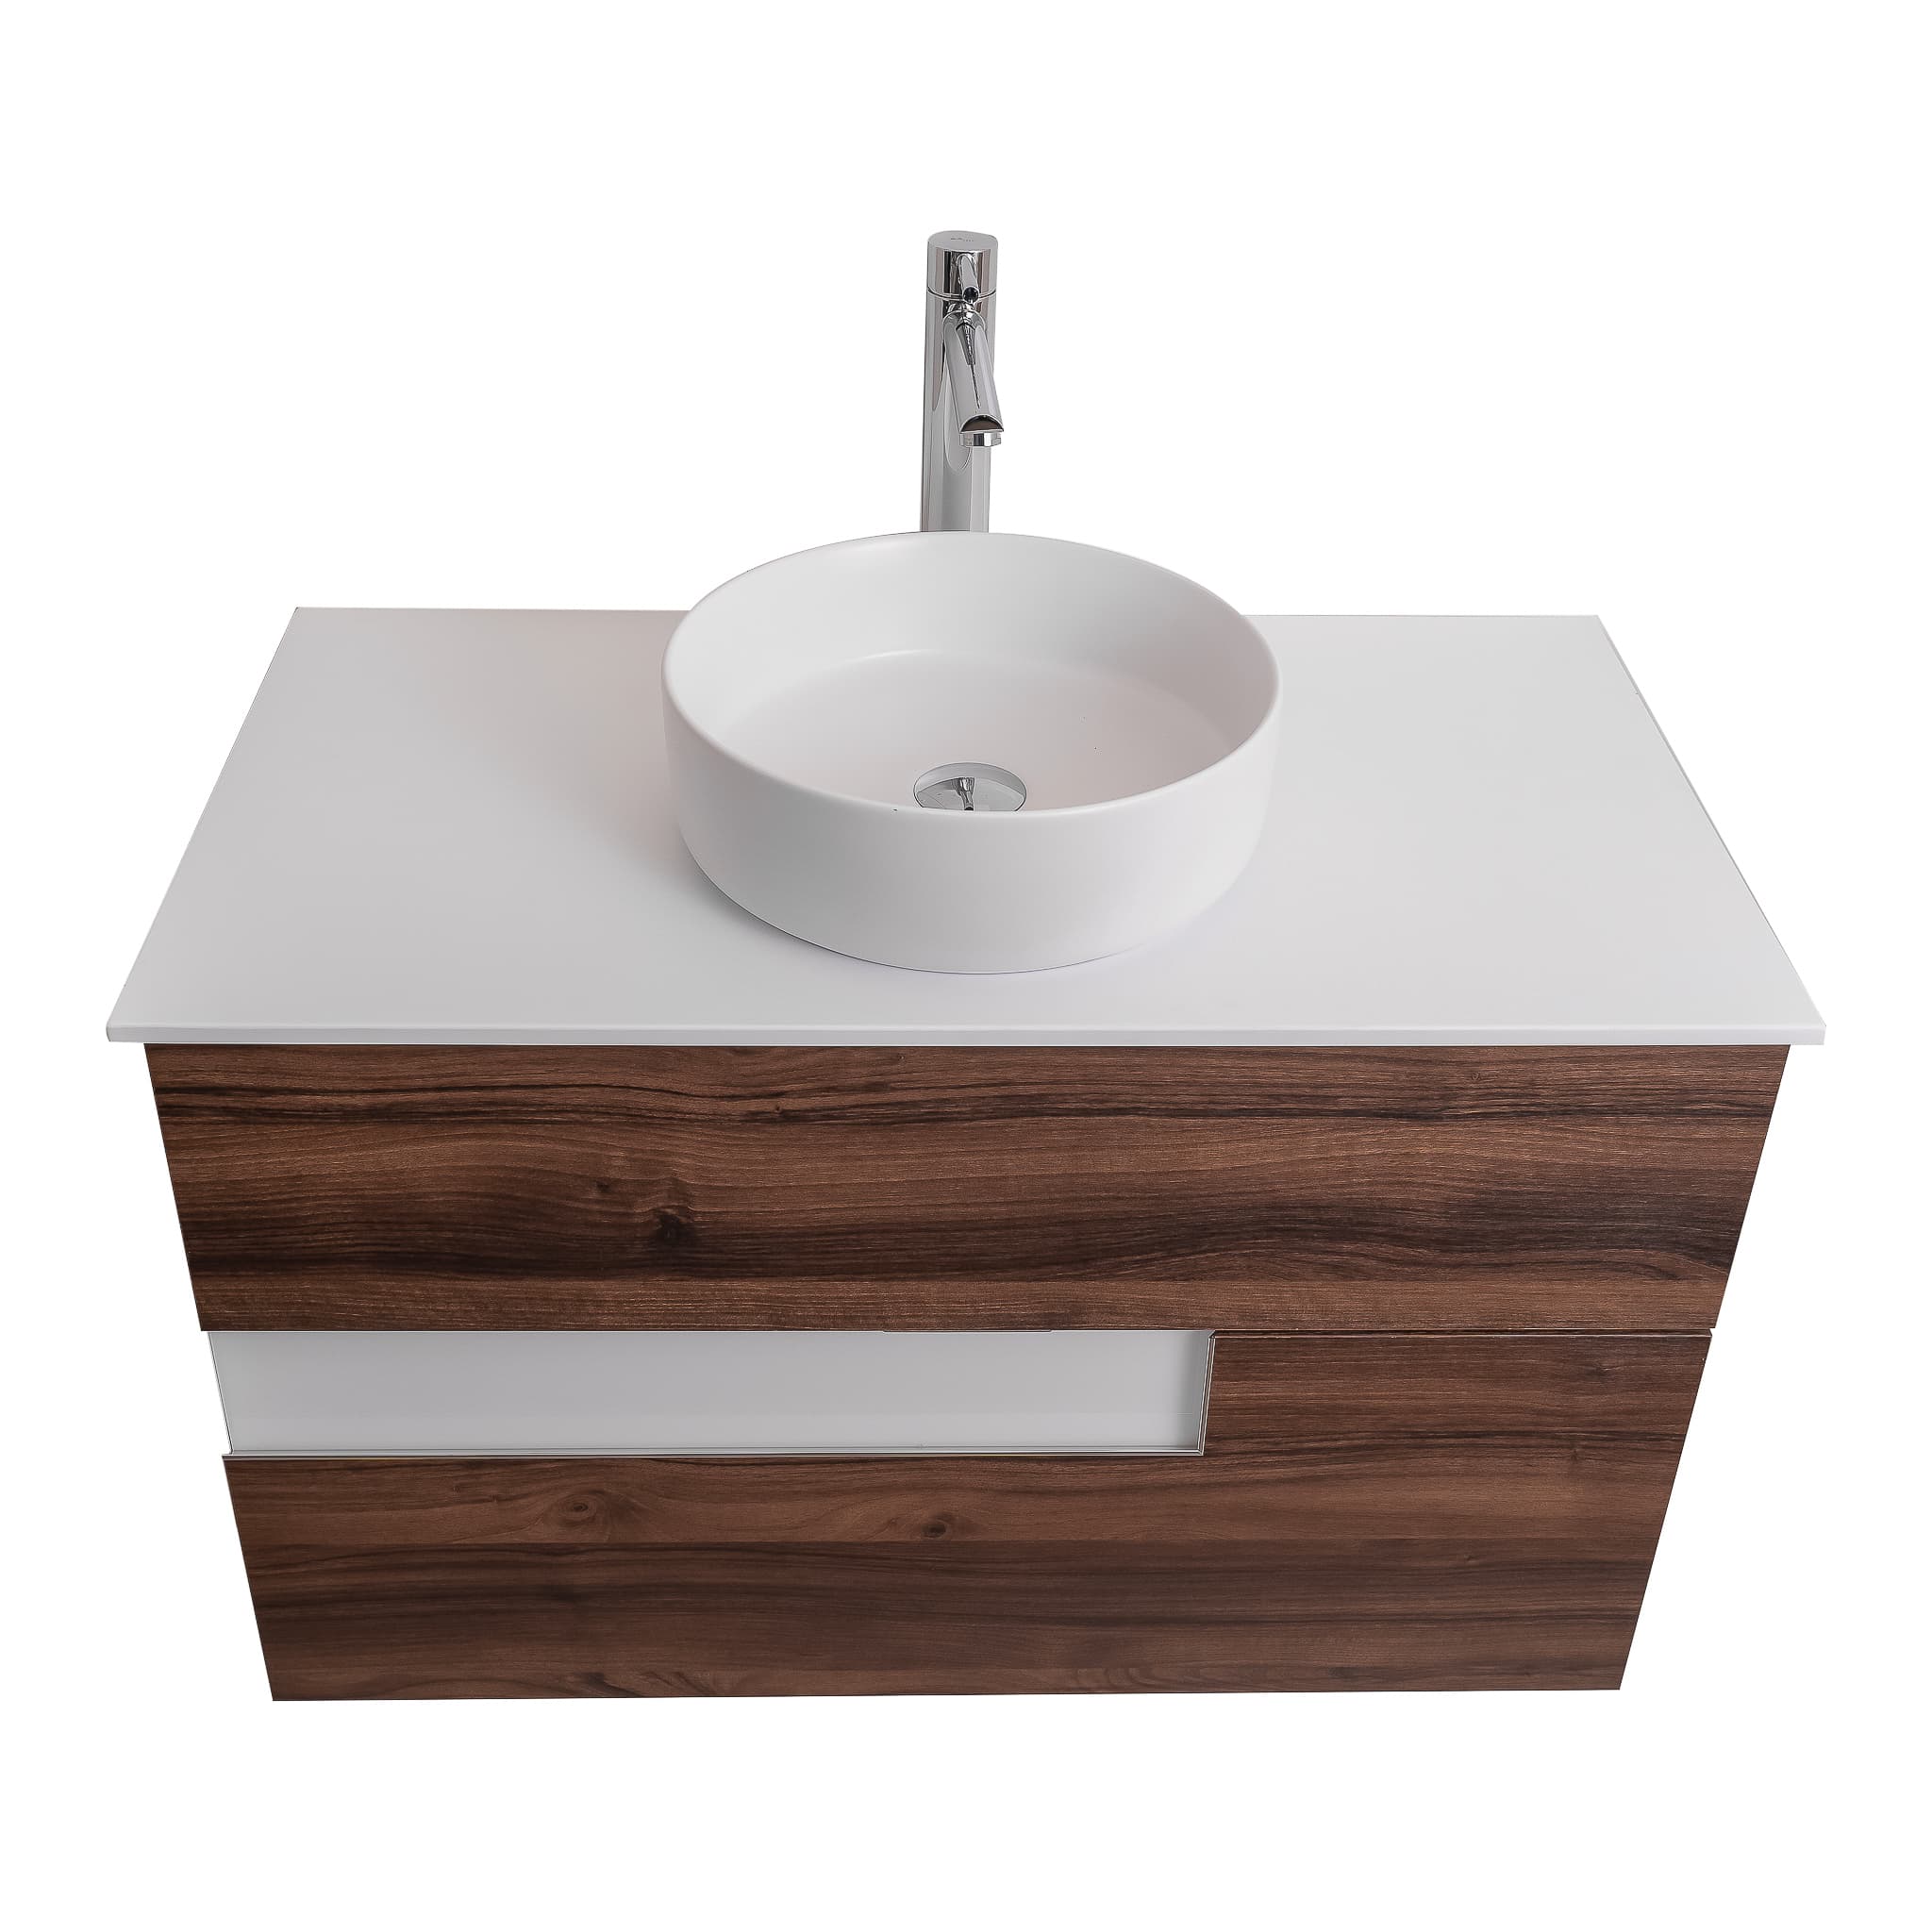 Vision 39.5 Valenti Medium Brown Wood Cabinet, Ares White Top And Ares White Ceramic Basin, Wall Mounted Modern Vanity Set